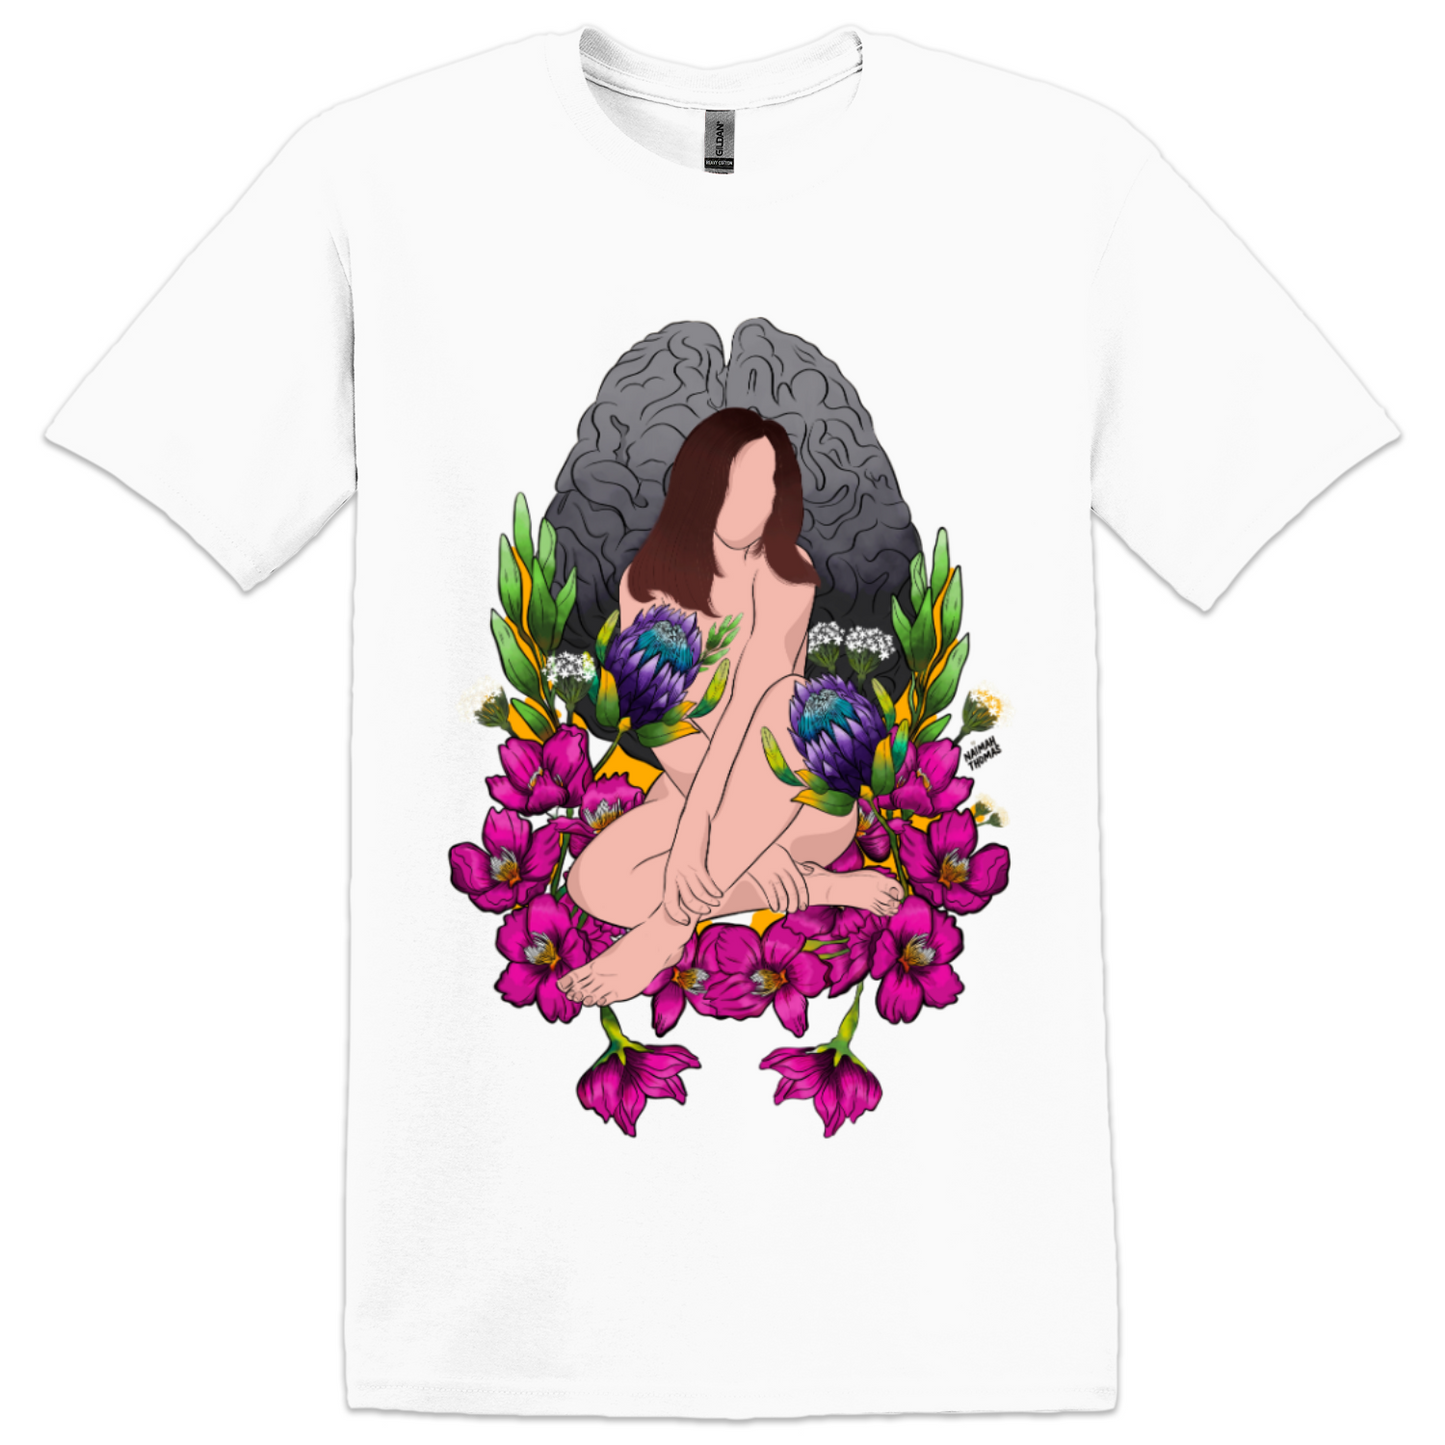 "Wandering amongst the cherry blossoms" Women's Tee